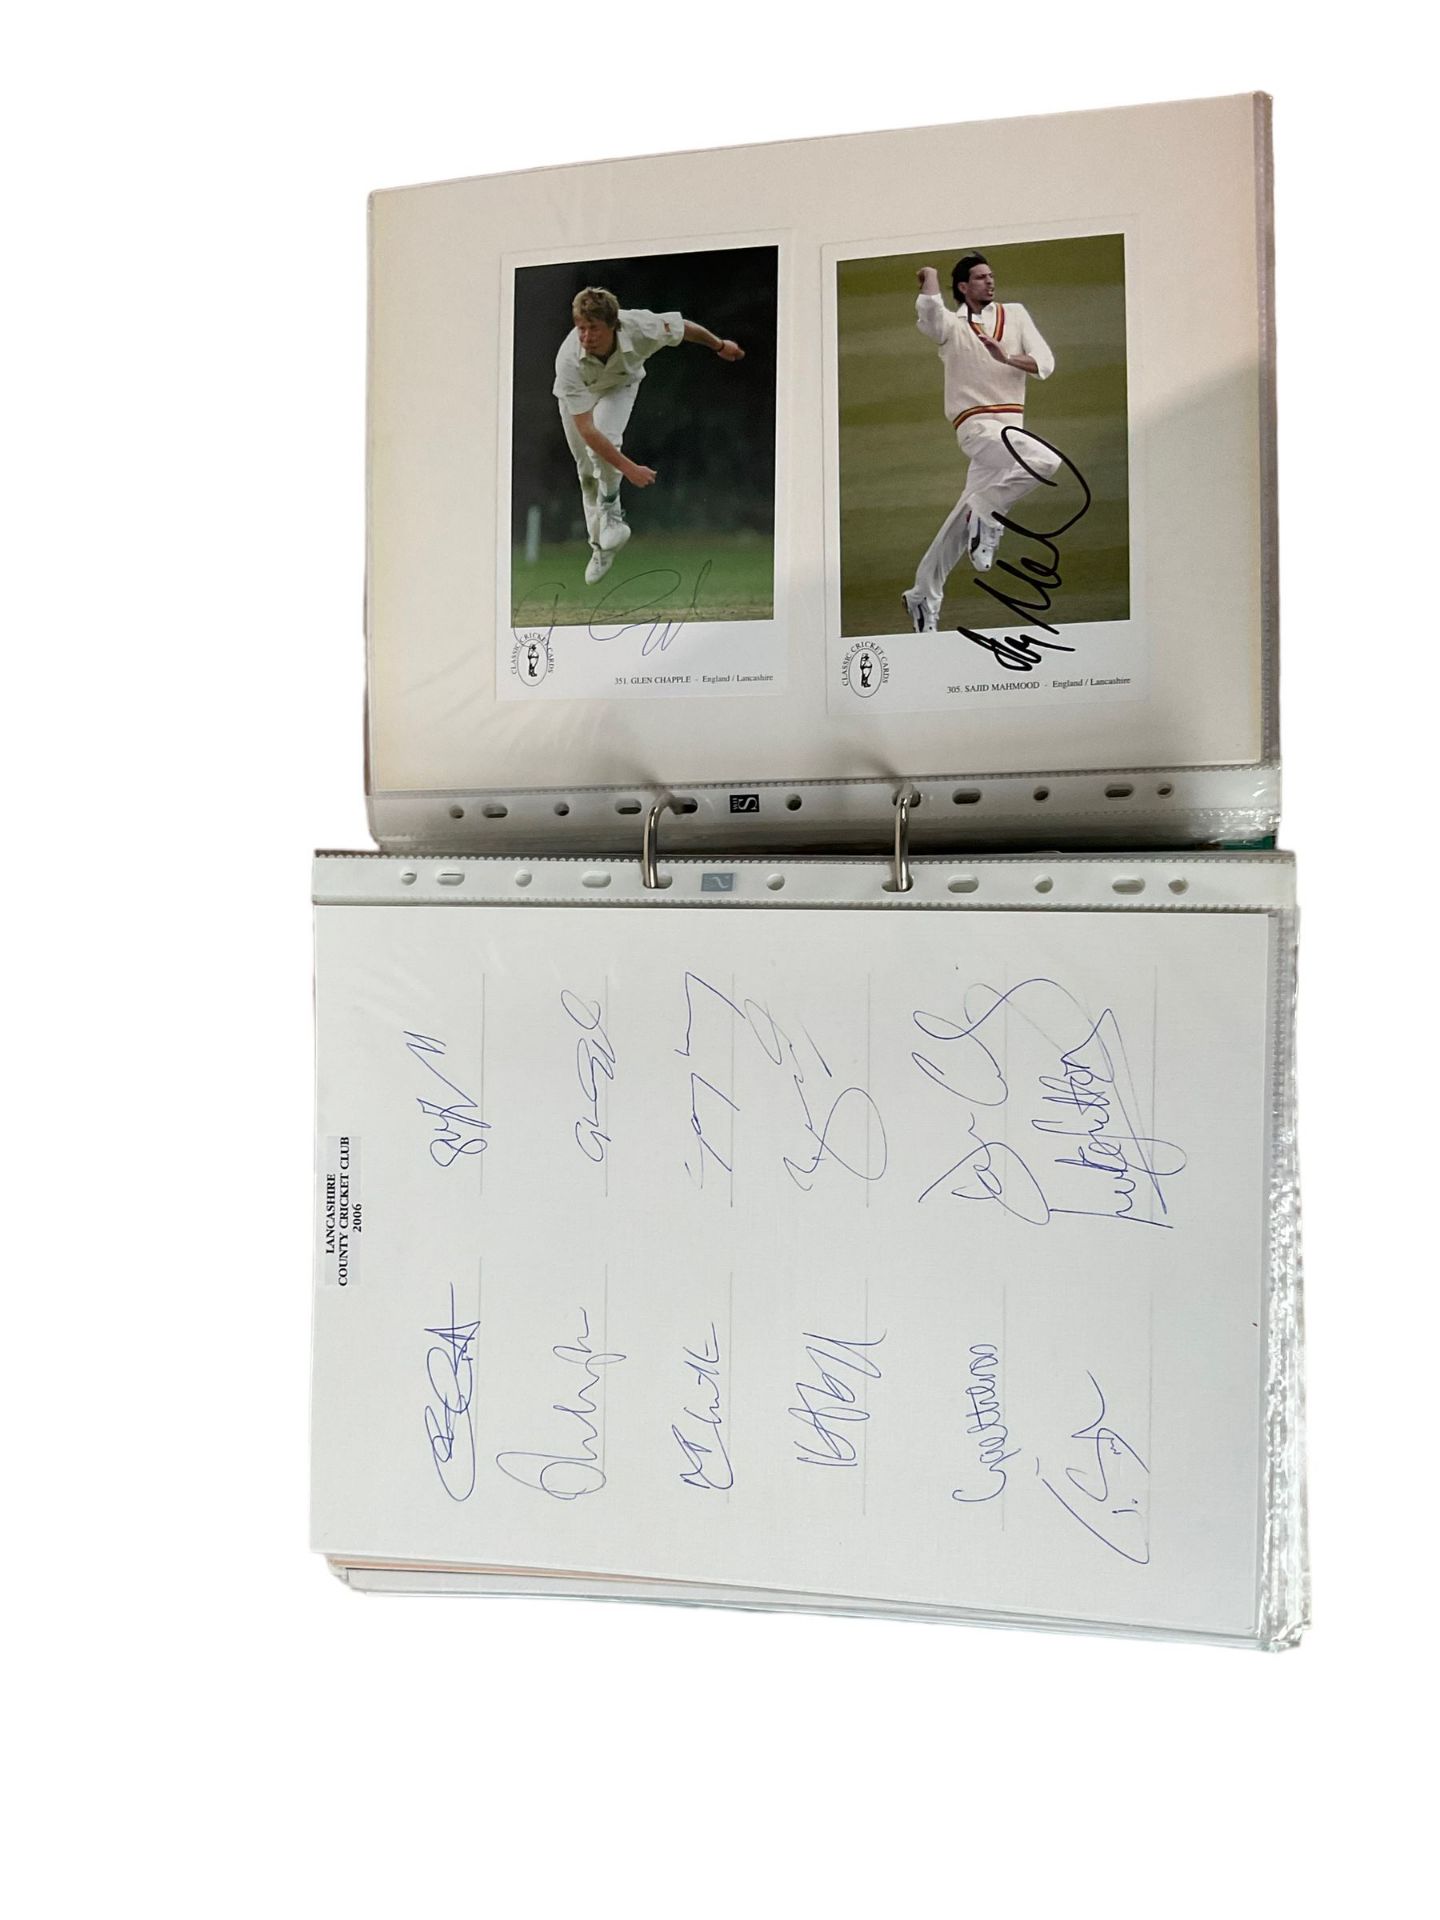 County Cricket - various autographs and signatures including Hugh Morris - Image 6 of 11